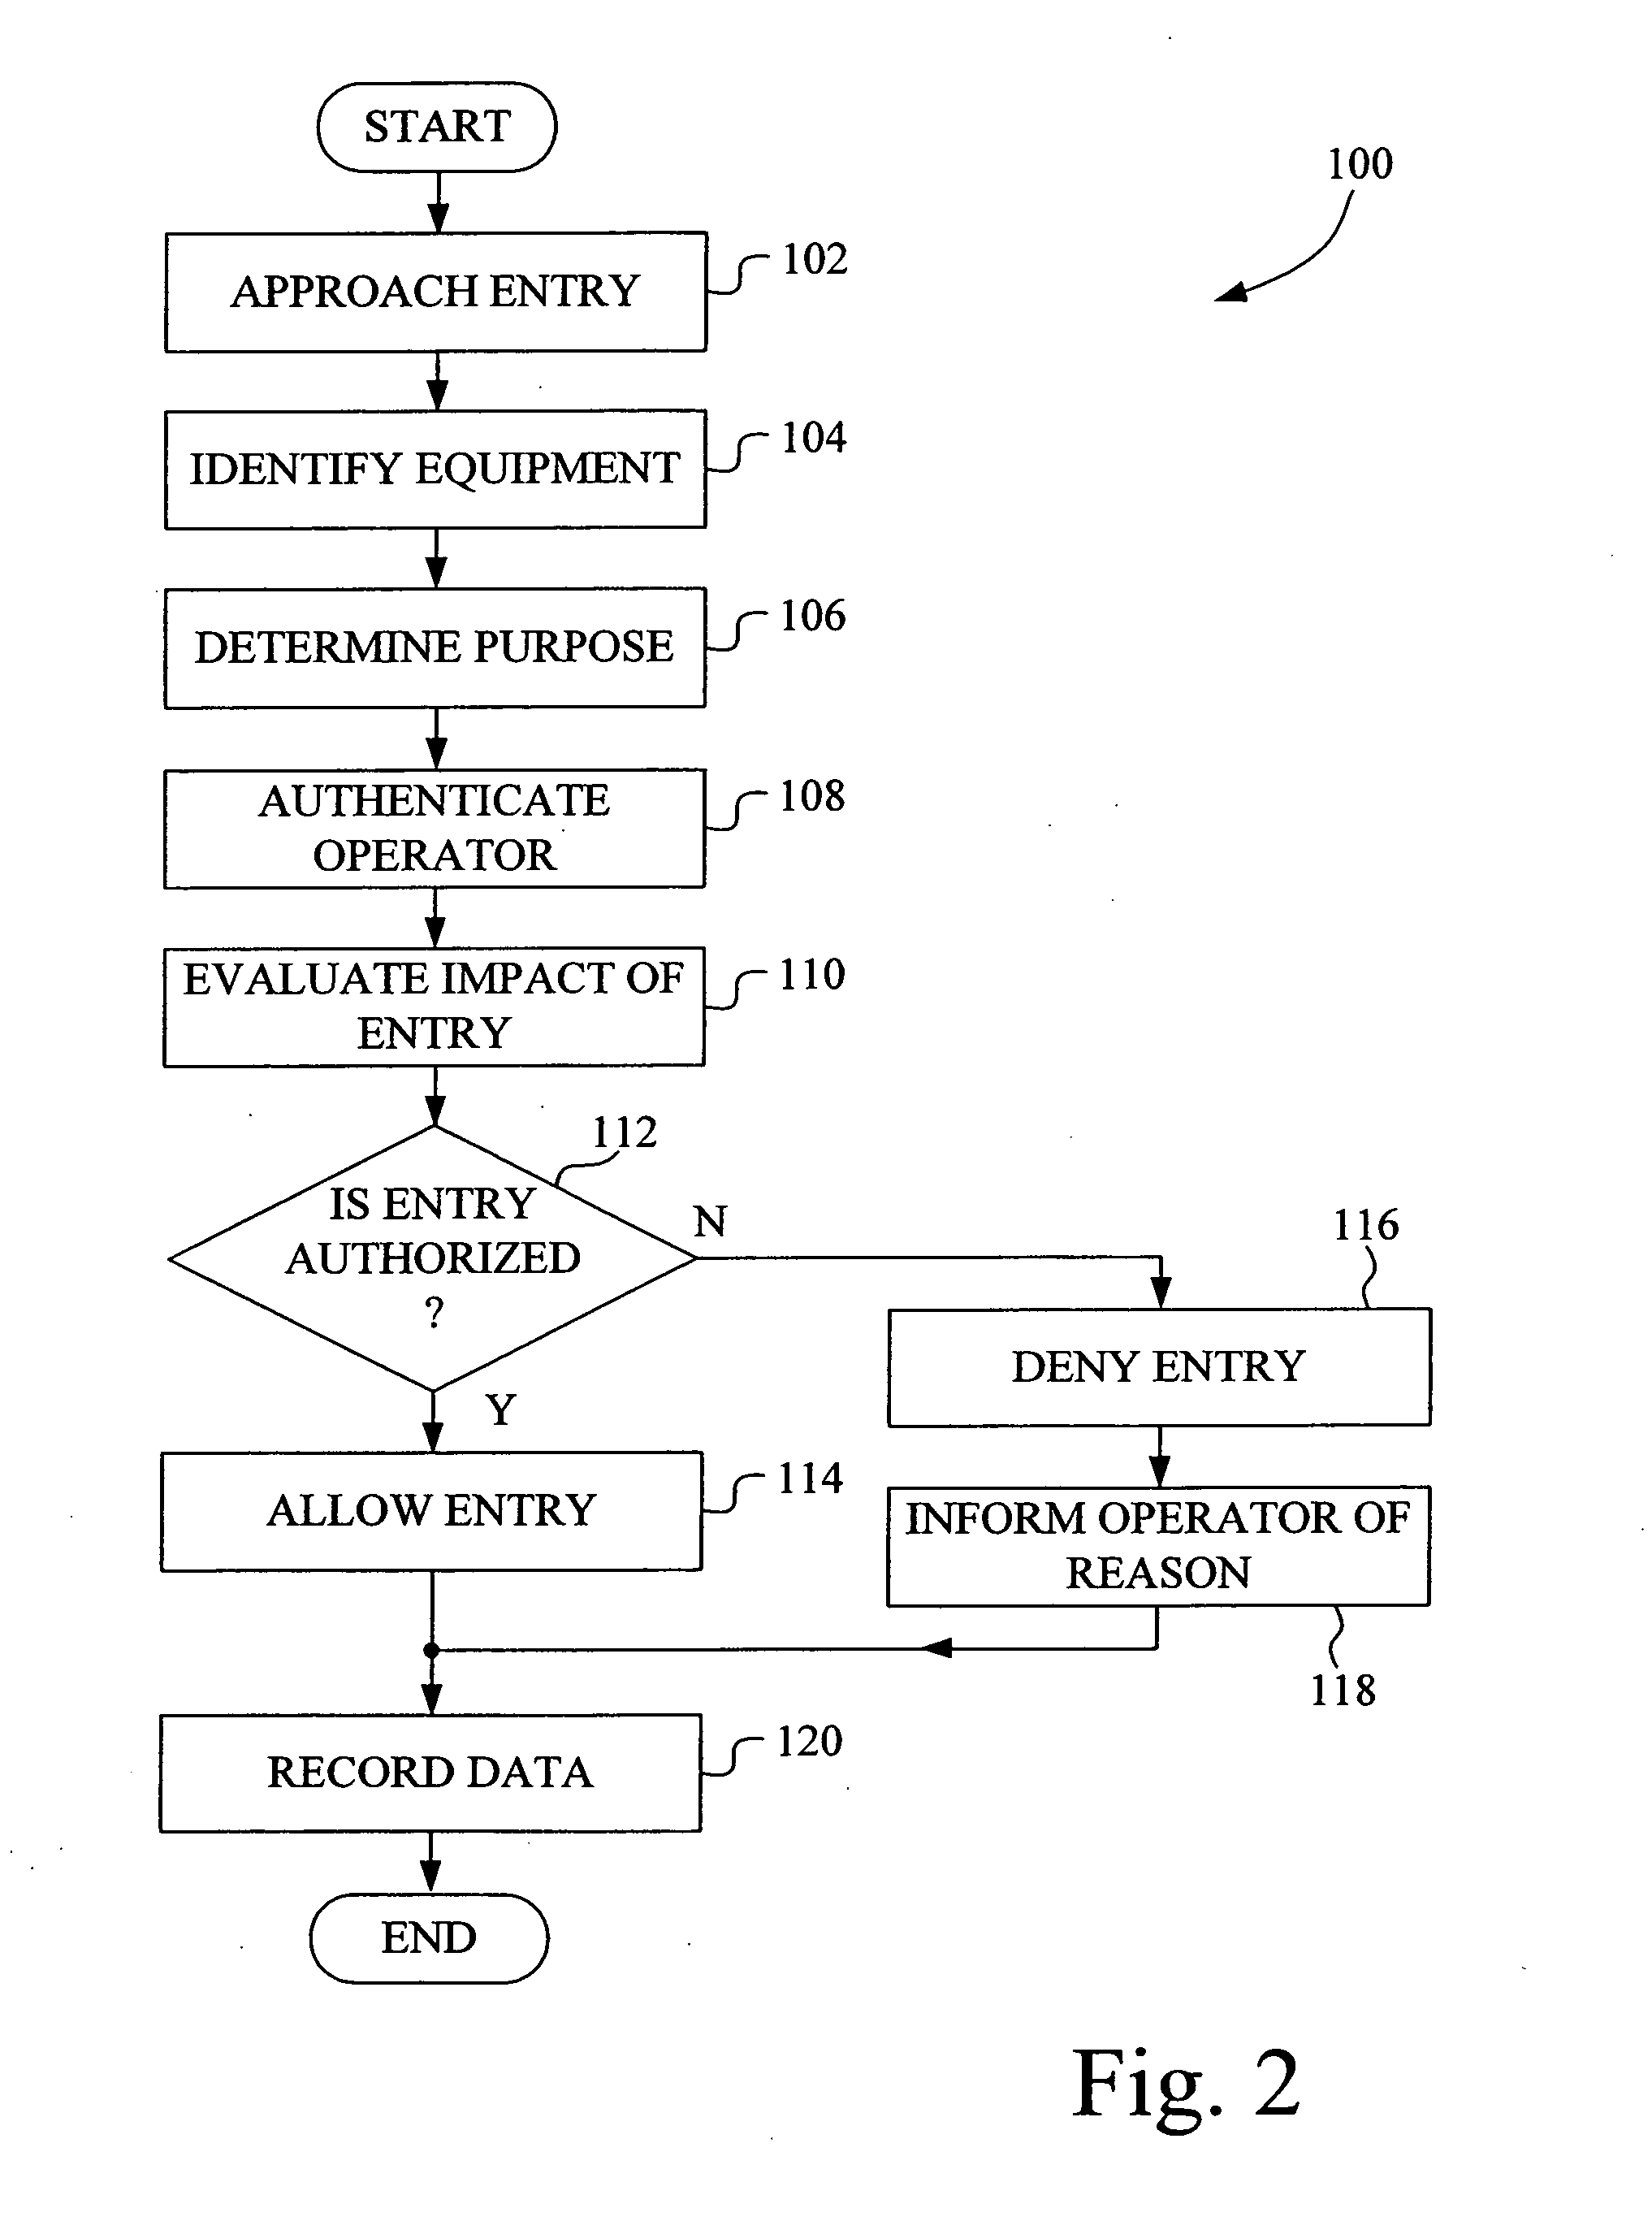 Method and system for determining suitability to enter a worksite and to perform an operation